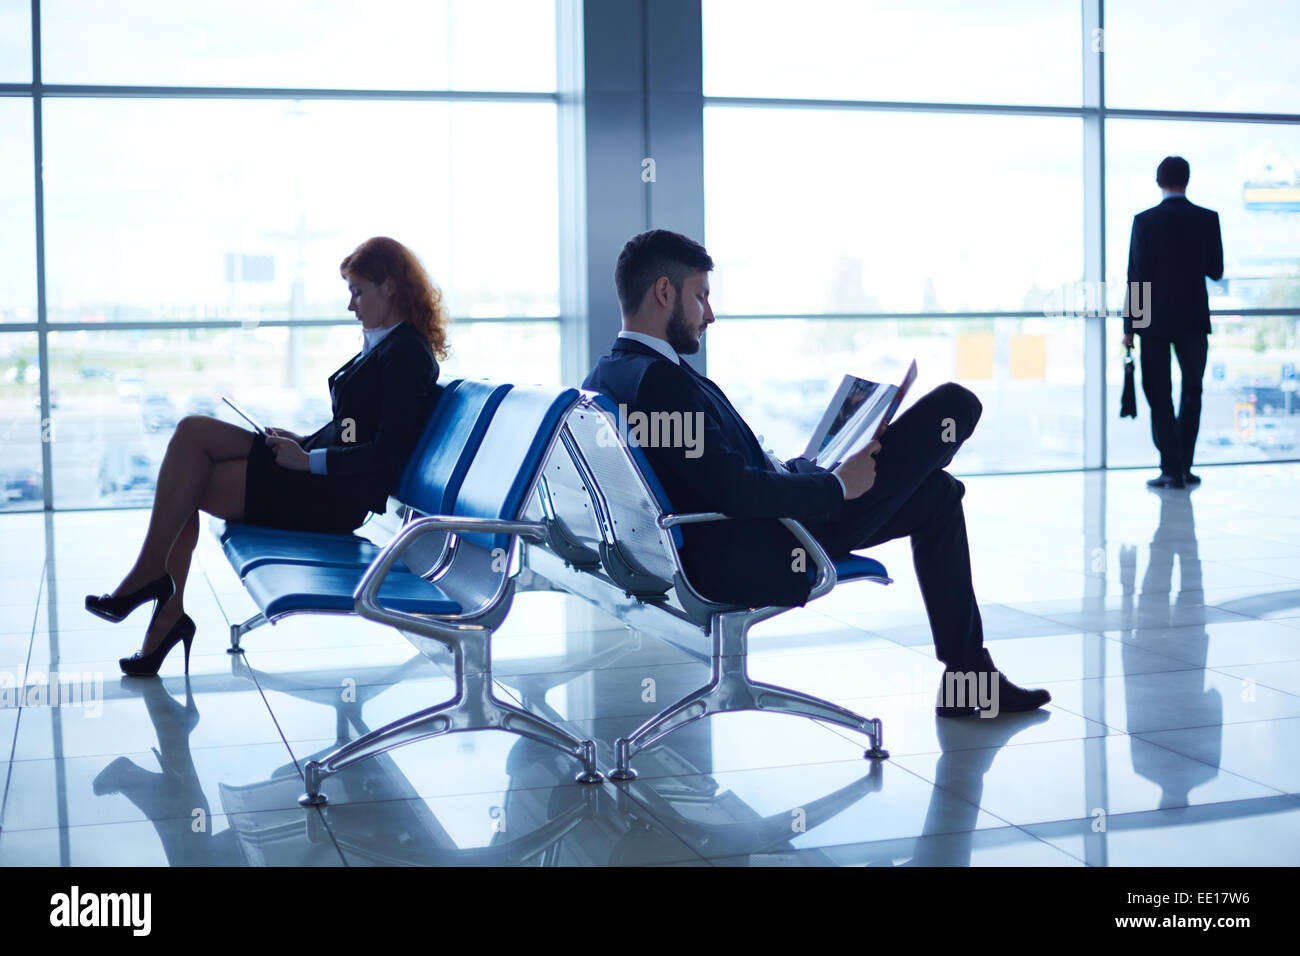 Business people reading periodicals in the airport Stock Photo